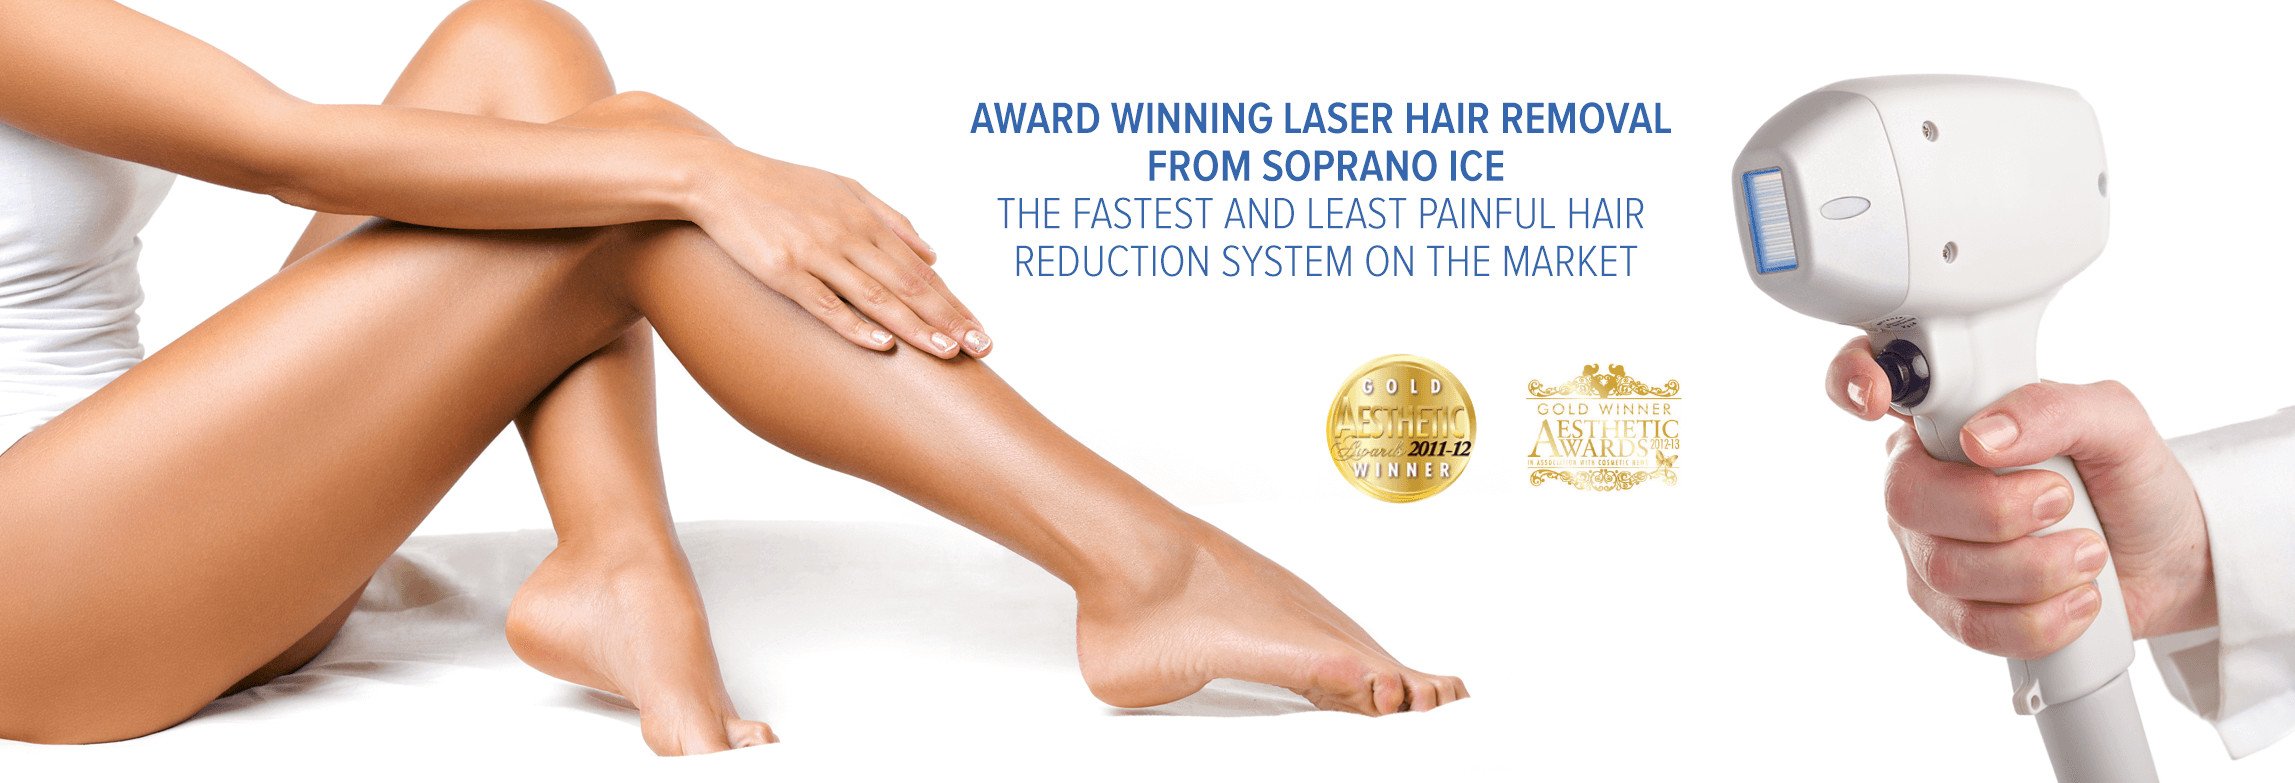 Laser Hair Removal Baby Hair
 TimelessSkinCare Clinic London best prices newest